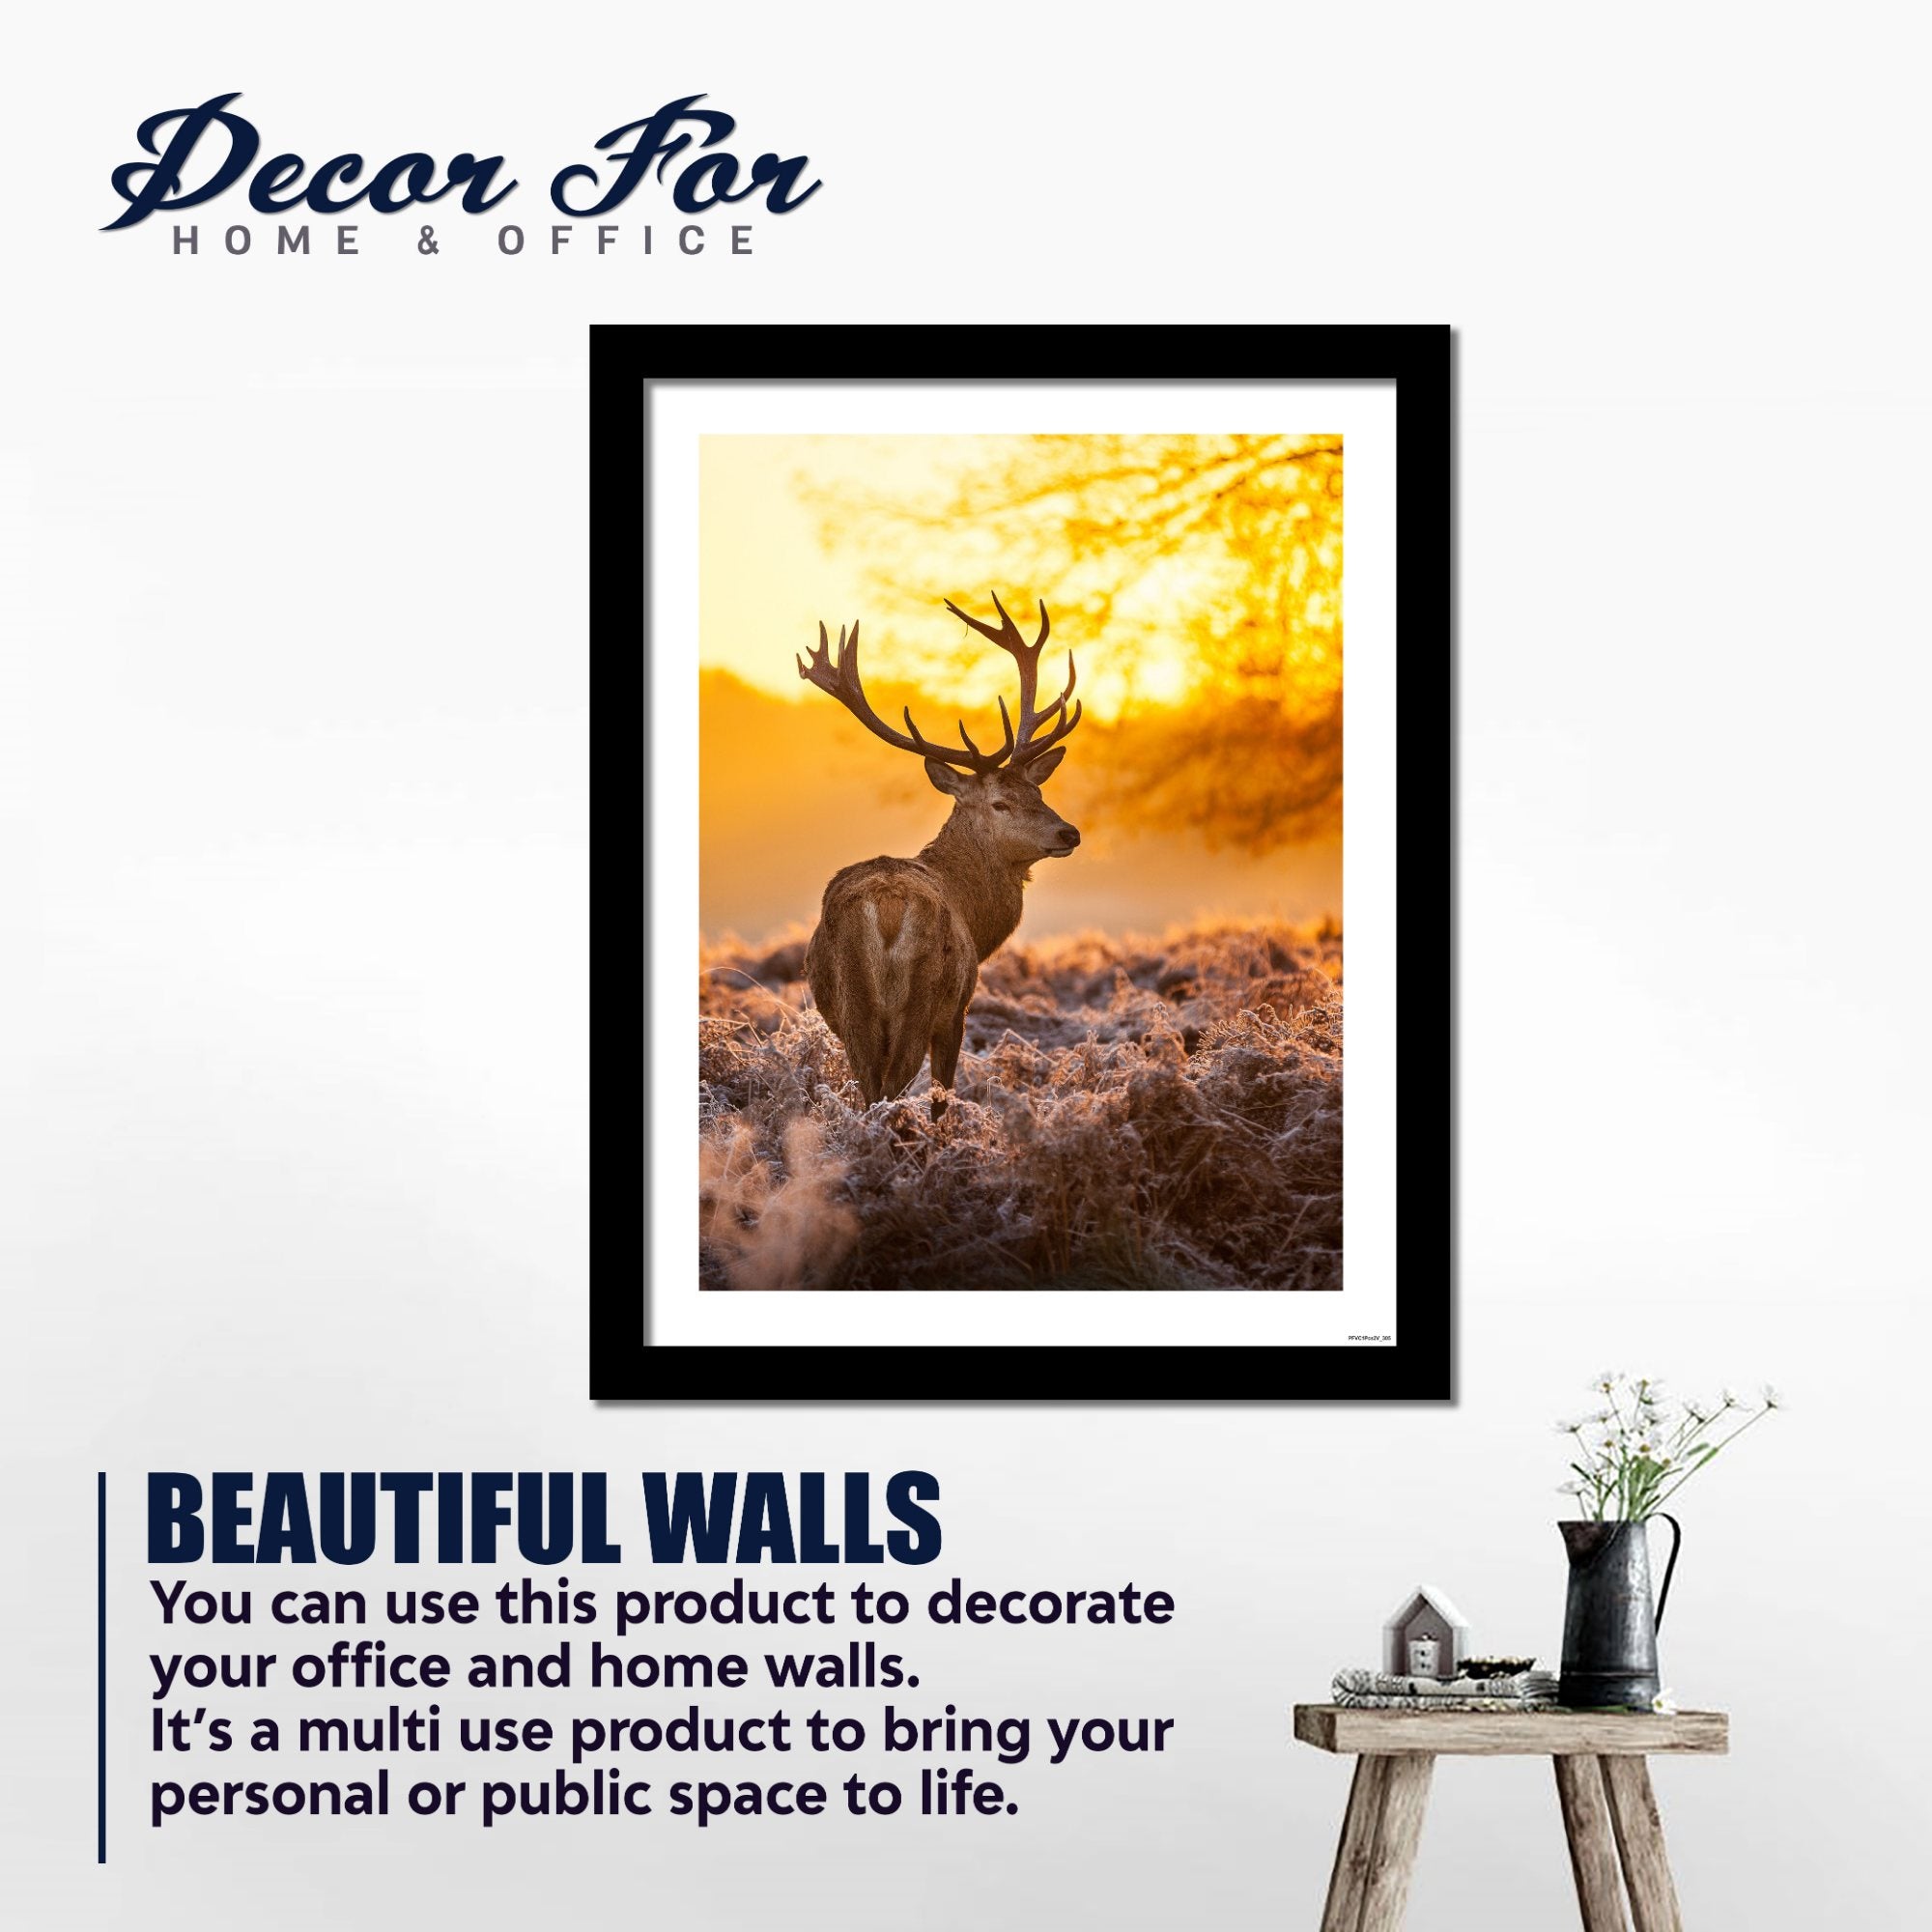 Premium Wall Frame Painting of Deer in Forest